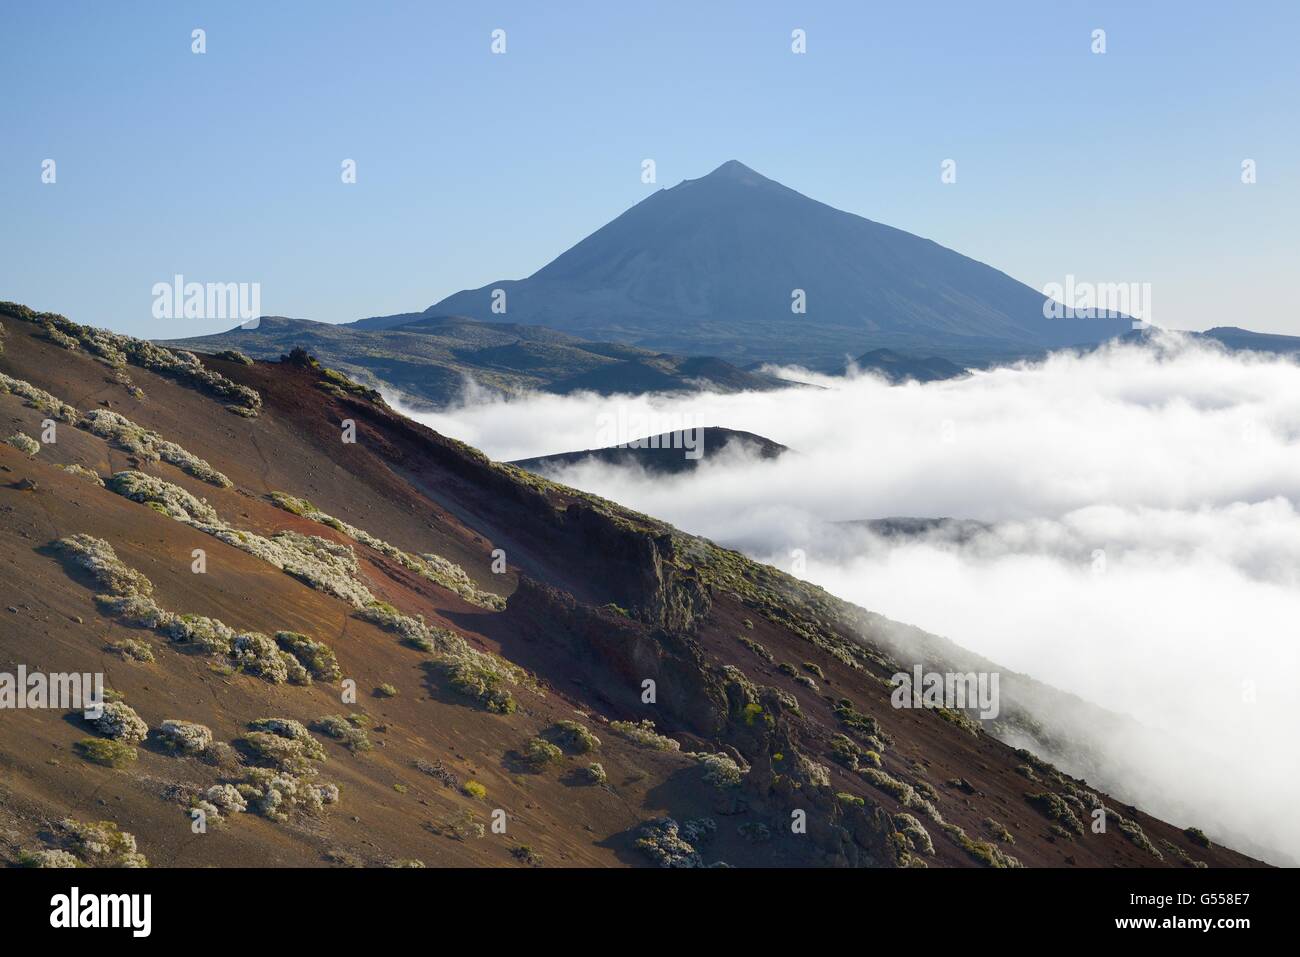 Clumps of Teide white broom (Spartocytisus supranubius) flowering on volcanic slopes of Mount Teide with a sea of cloud rising. Stock Photo